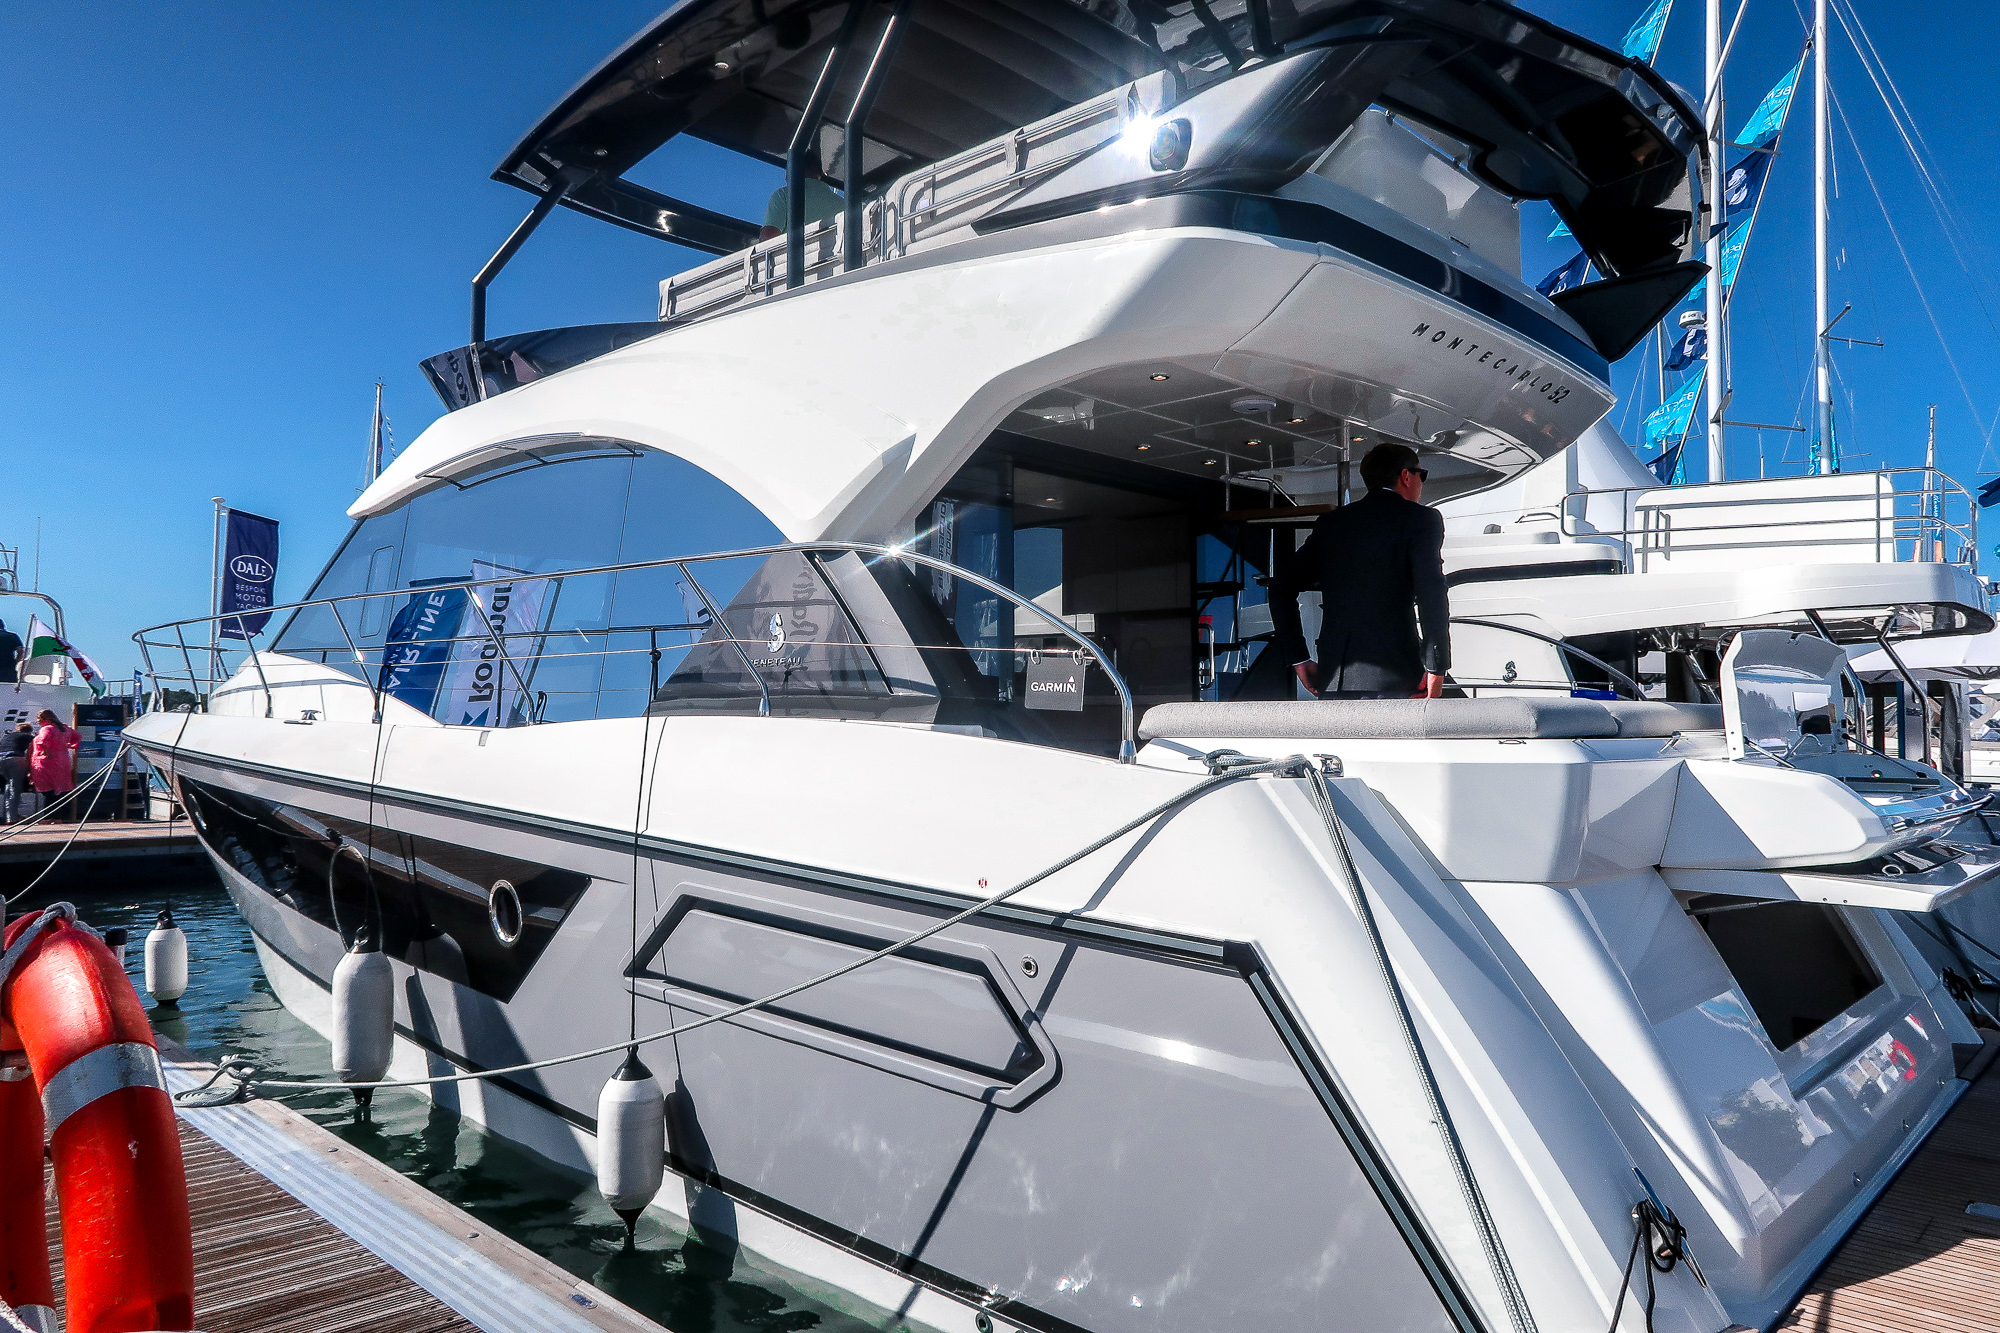 Southampton Boat Show: How To Get Discounted Tickets 20